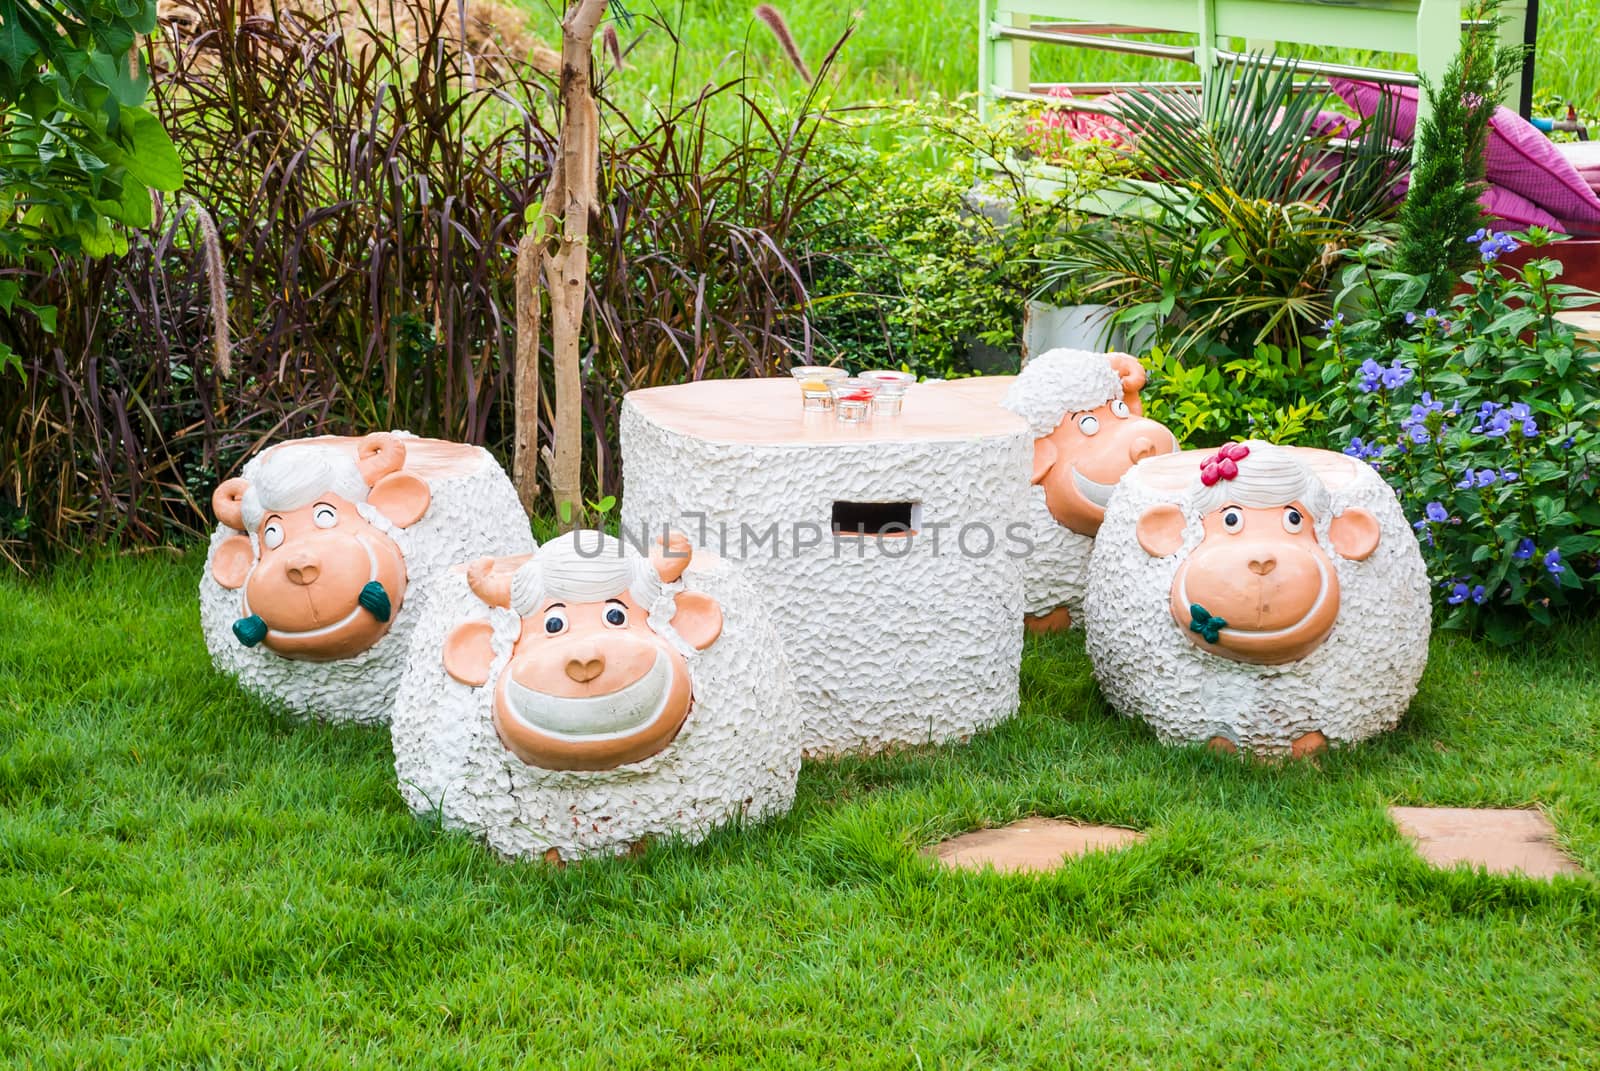 Sheep Shaped Concrete Table and Chairs.